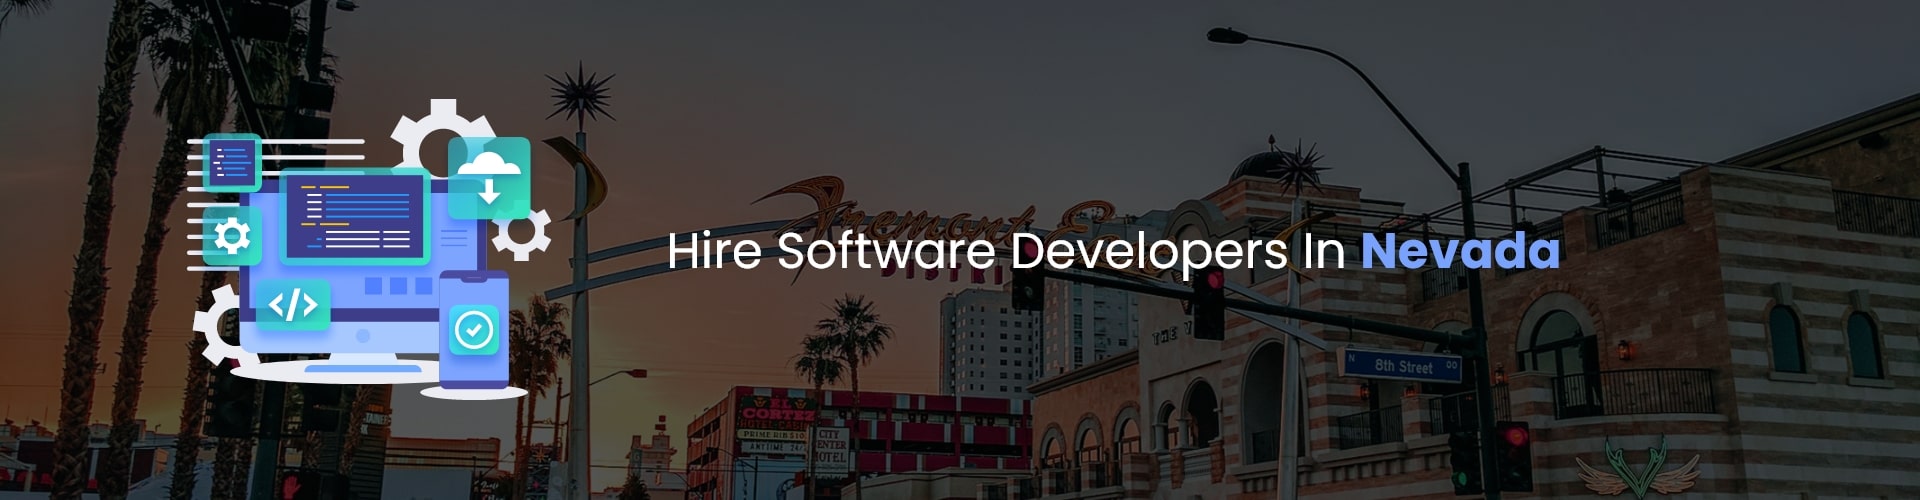 hire software developers in nevada